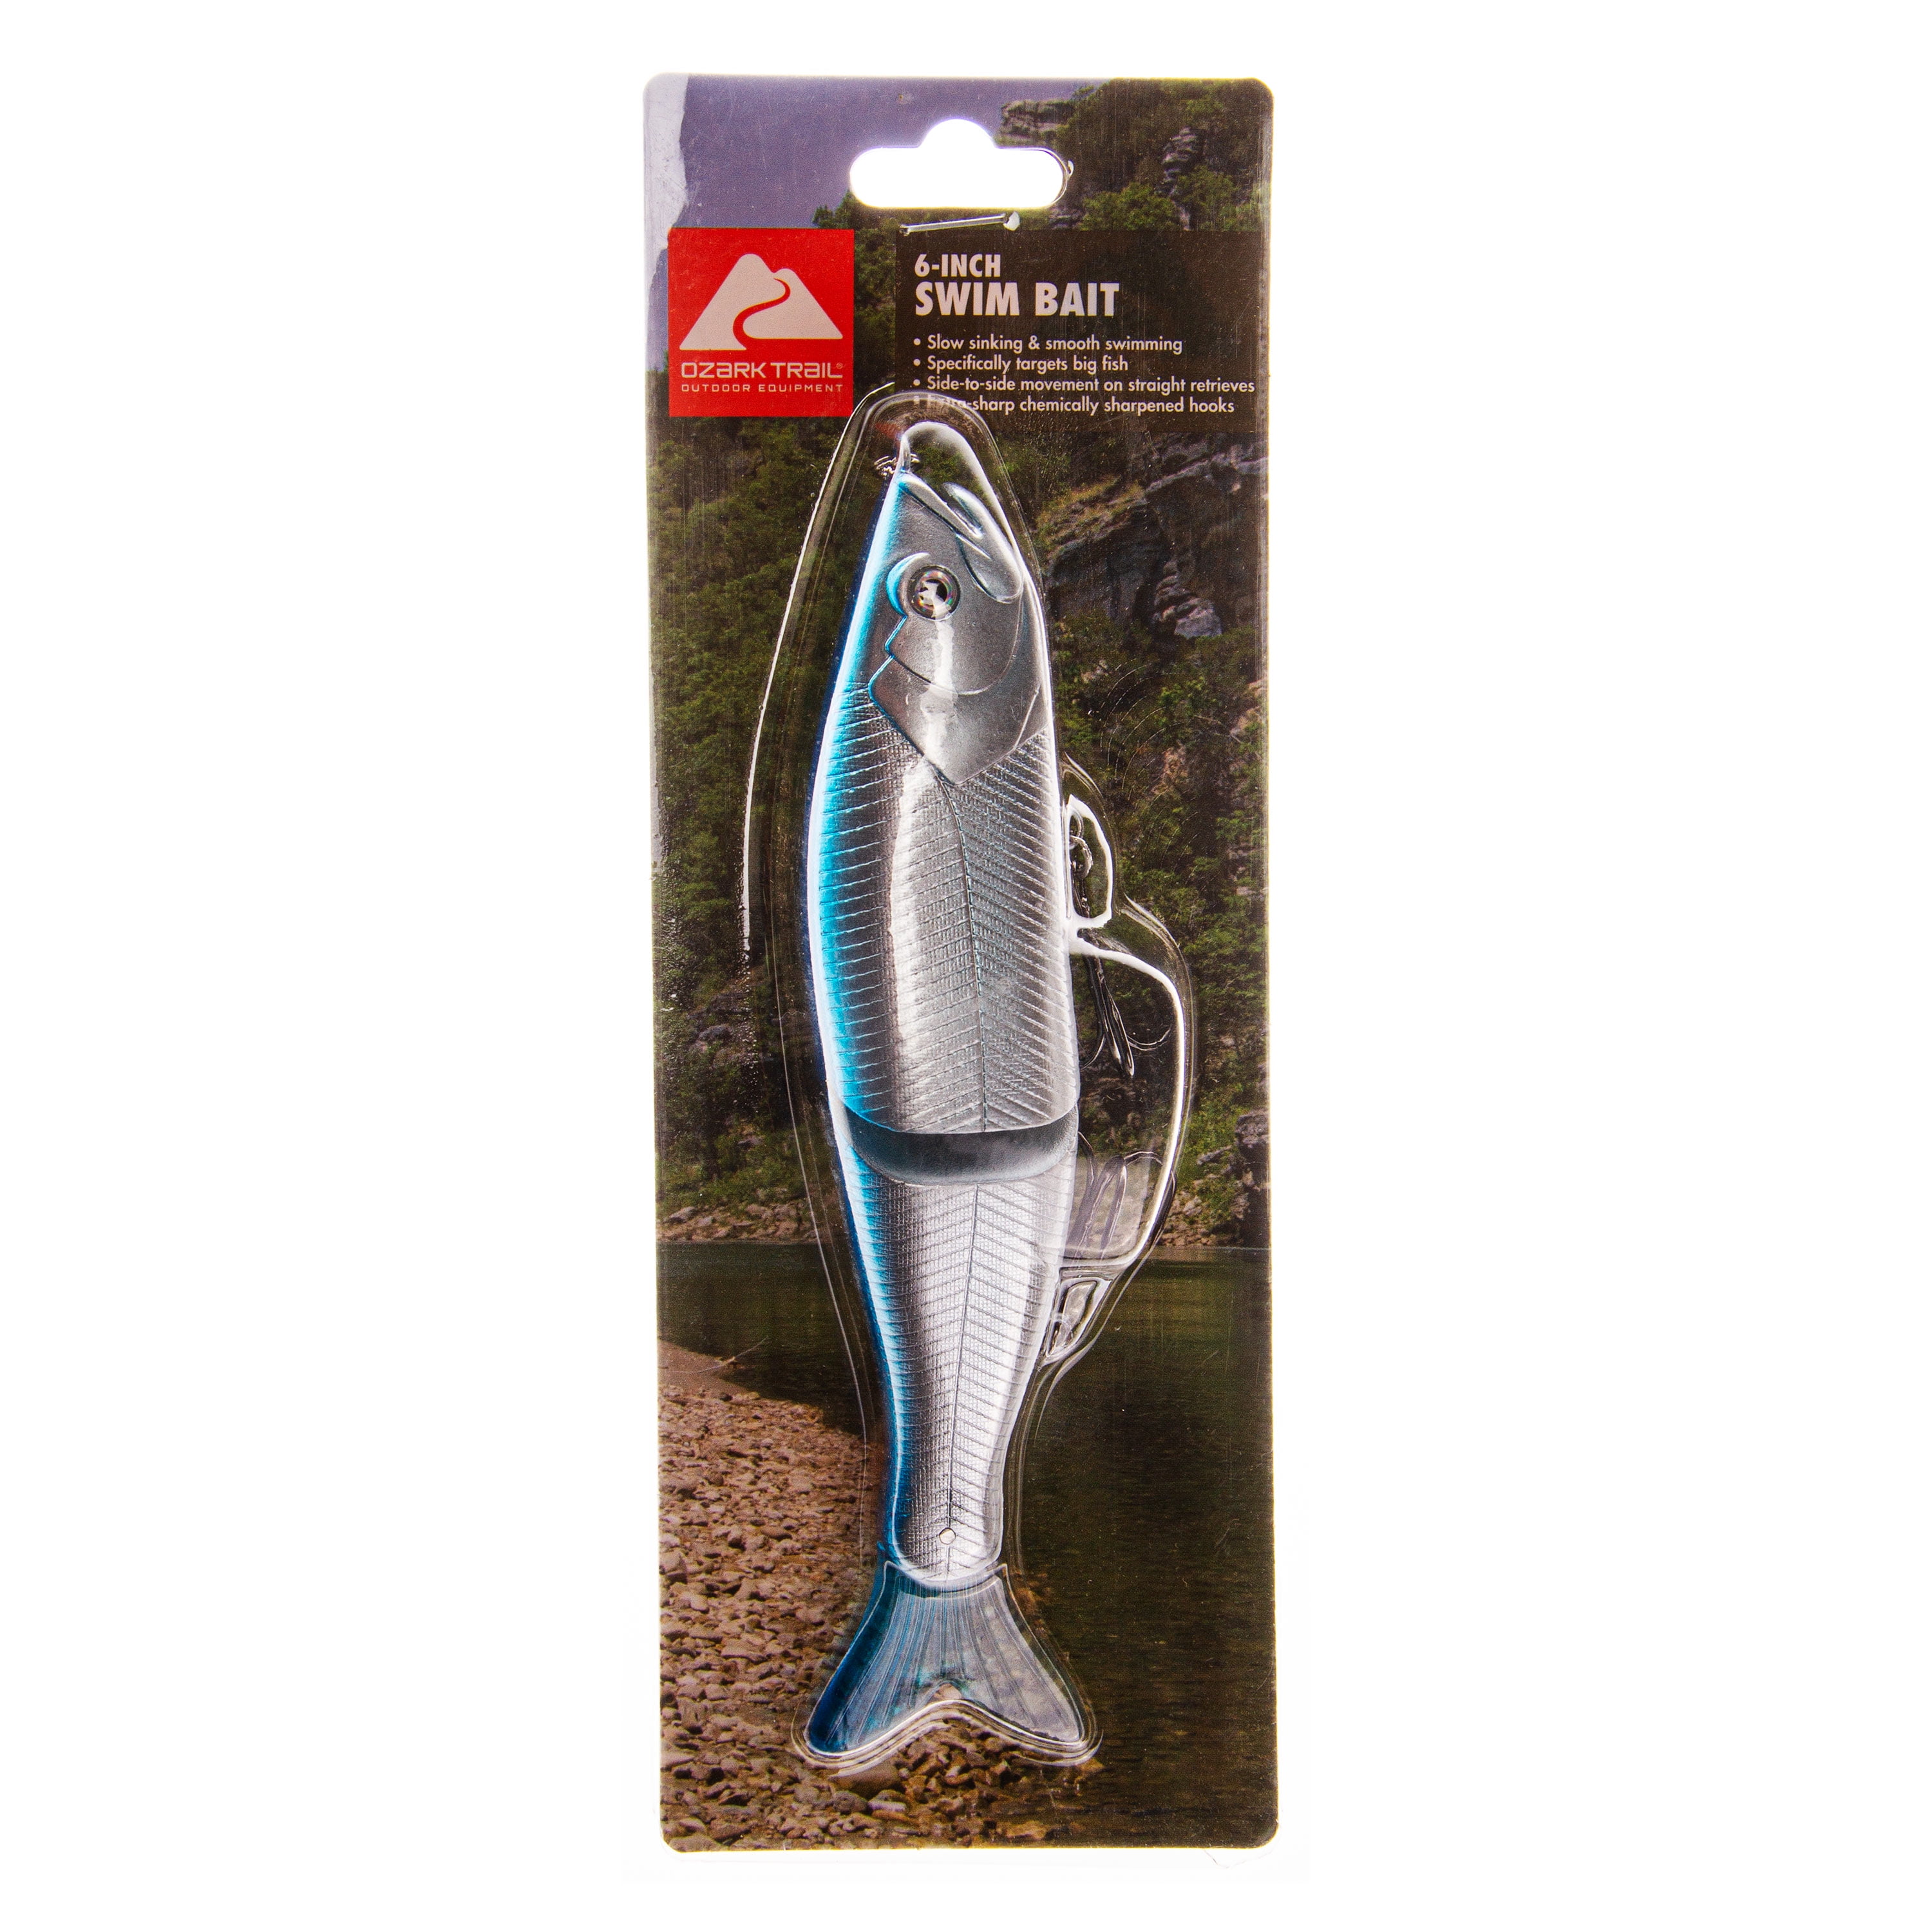 Ozark Trail Hard Plastic Freshwater Swimbait Fishing Lure 6 inch. Brightly Colored to Attract Nearby fish., Size: 6 inch